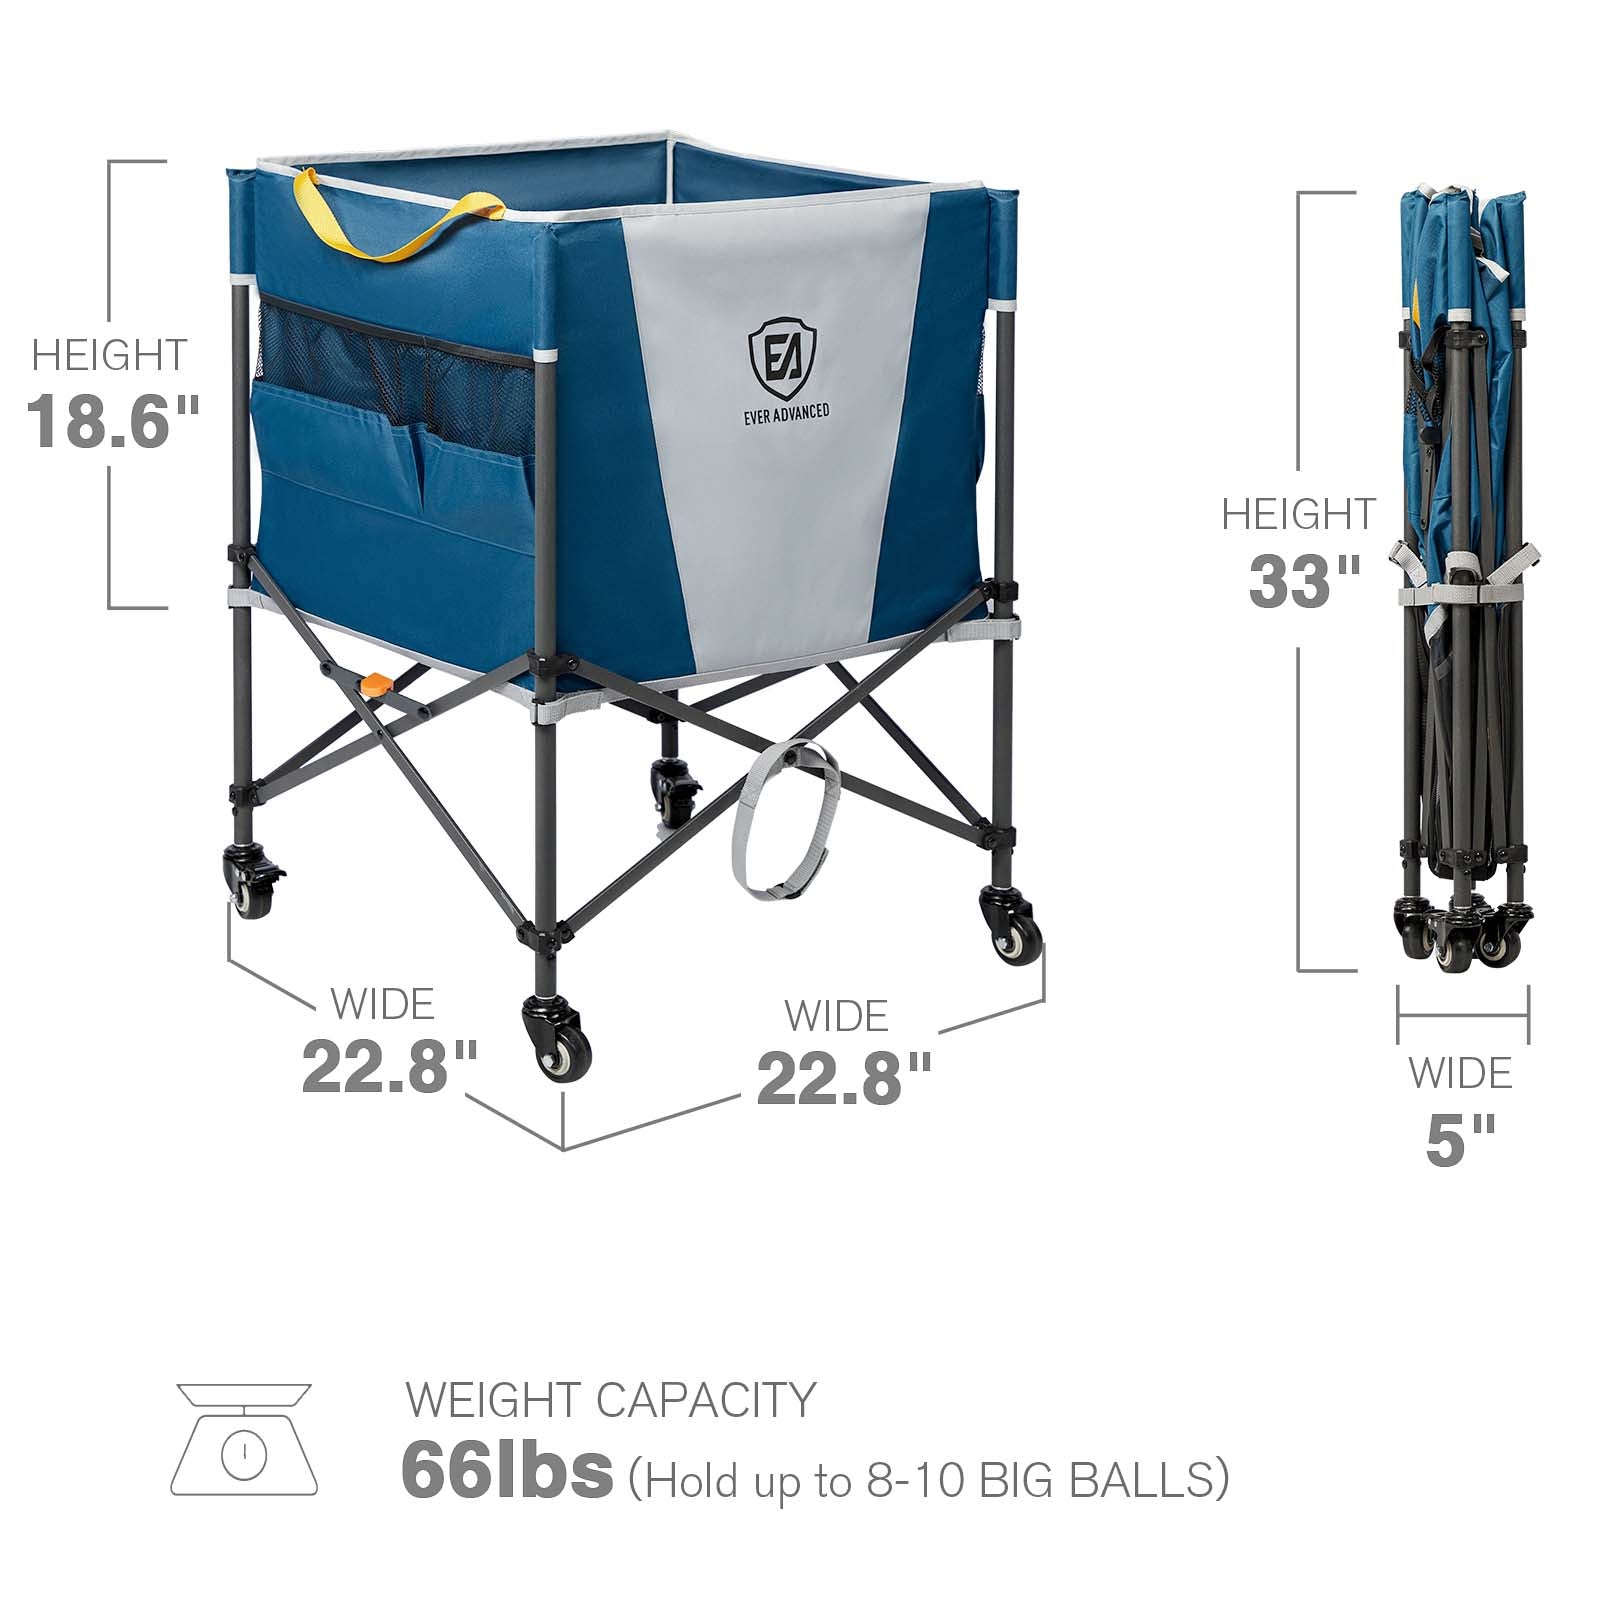 Collapsible Ball Storage Cart